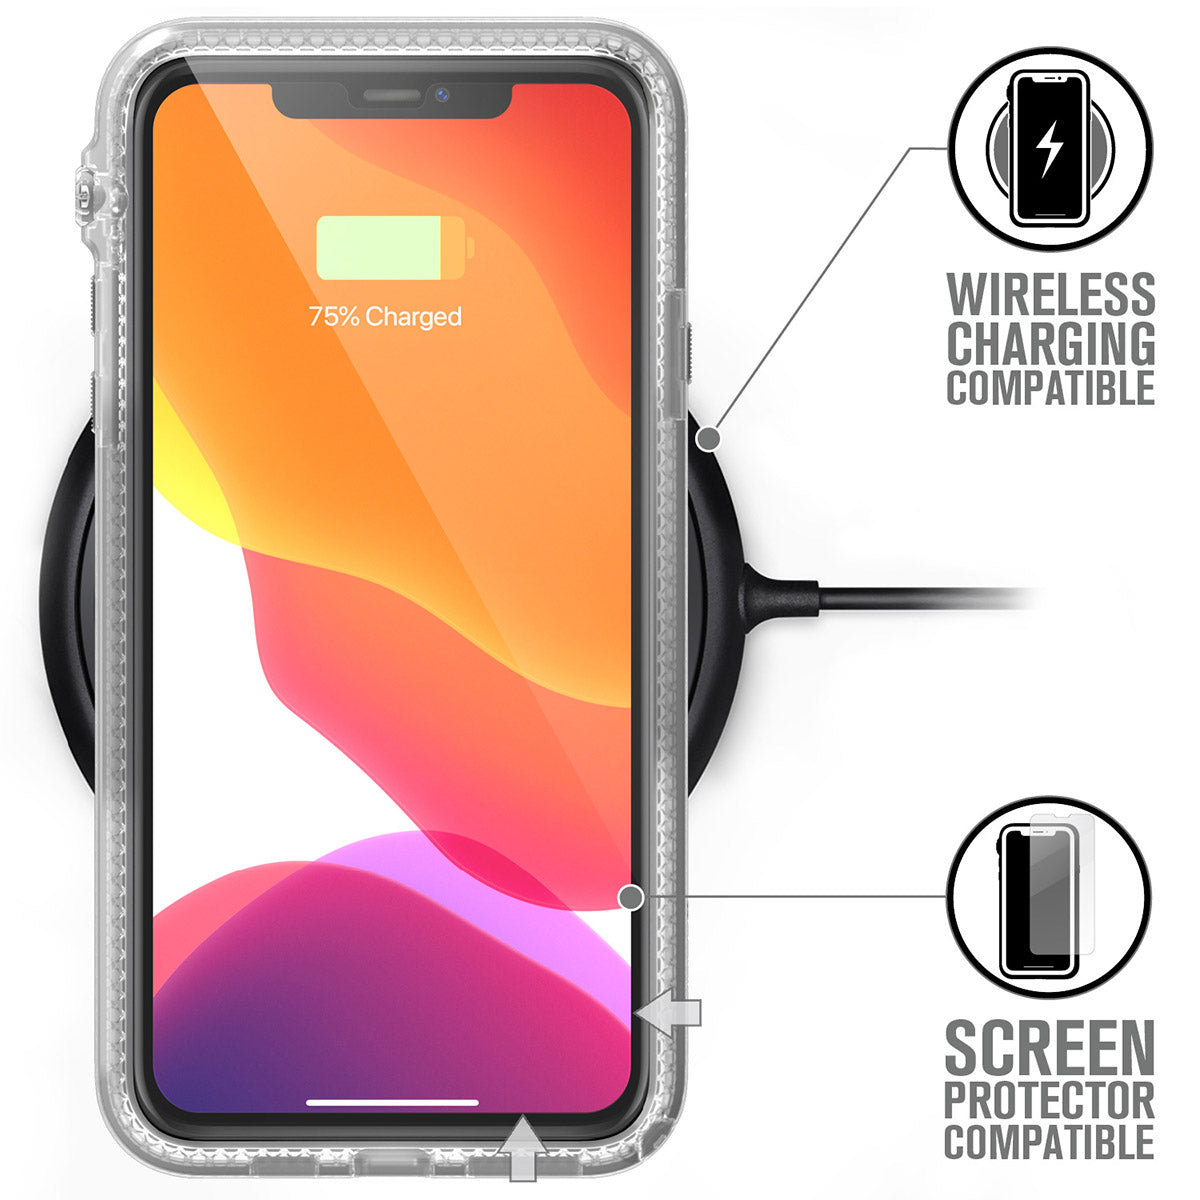 catalyst iPhone 11 series impact protection case for iphone 11 pro max clear placed on the wireless charger 75% charged text reads wireless charging compatible screen protector compatible